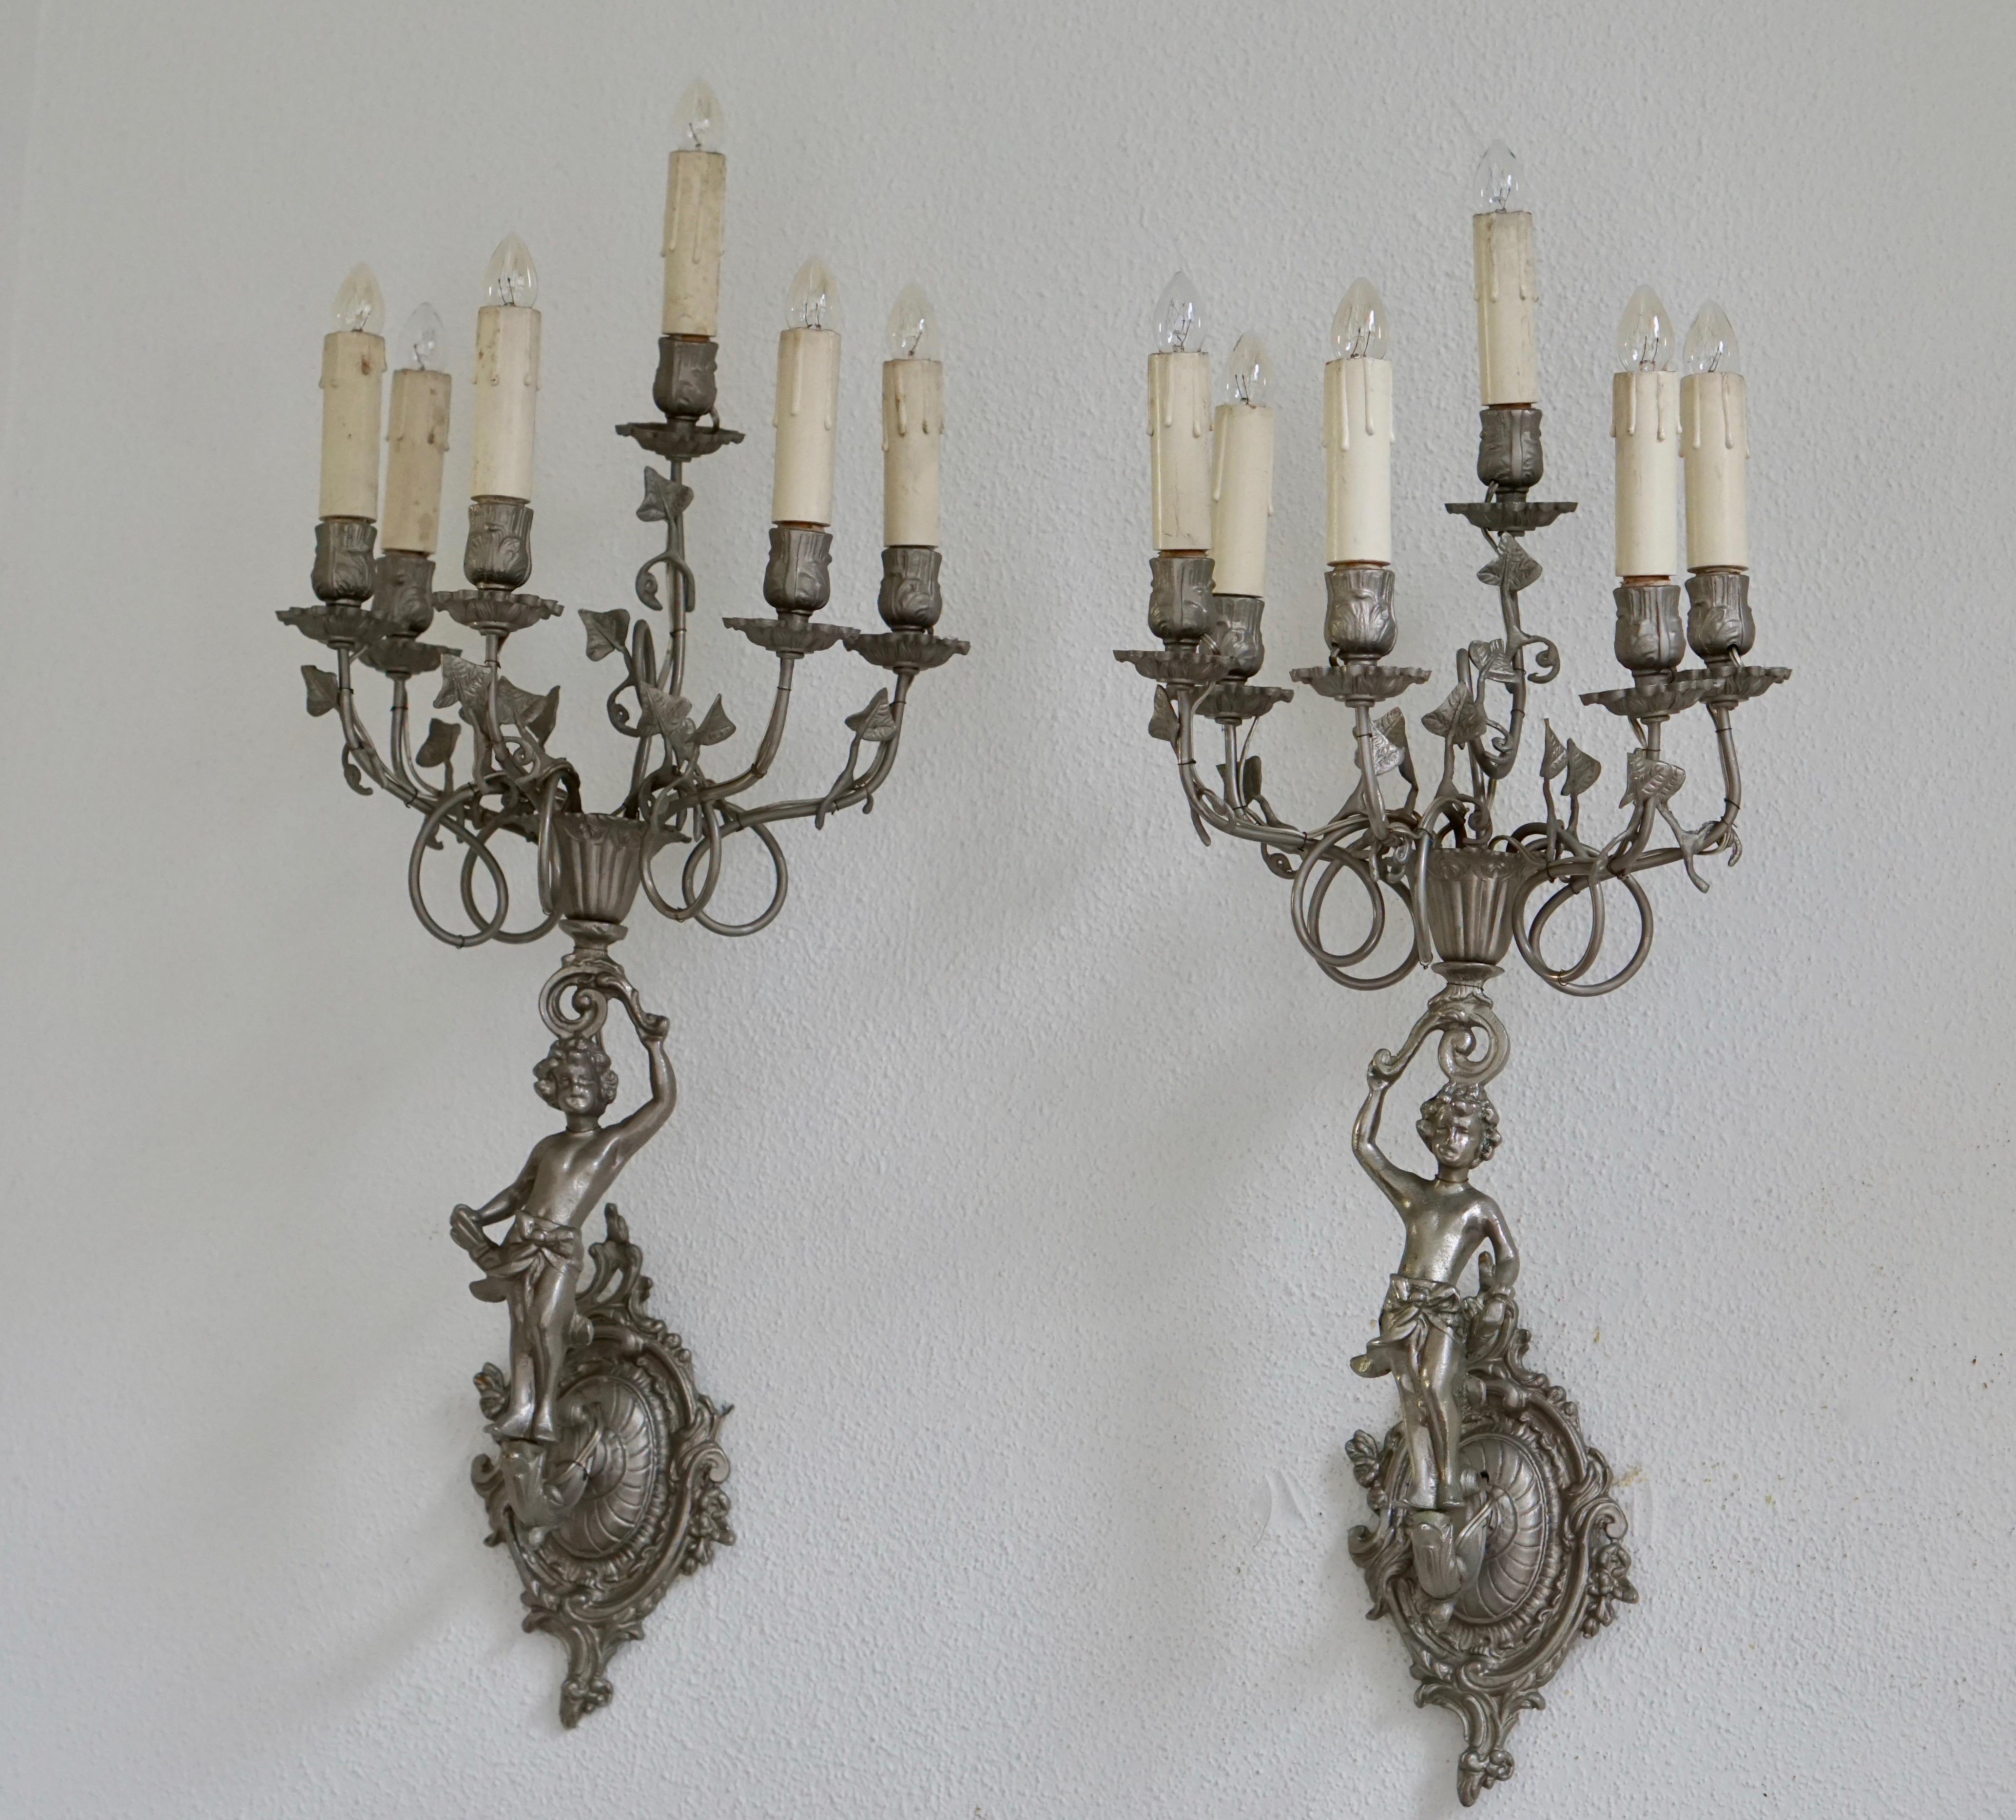 Two large wall lights with each six E14 bulbs.
Measures: Height 70 cm.
Width 28 cm.
Depth 25 cm.